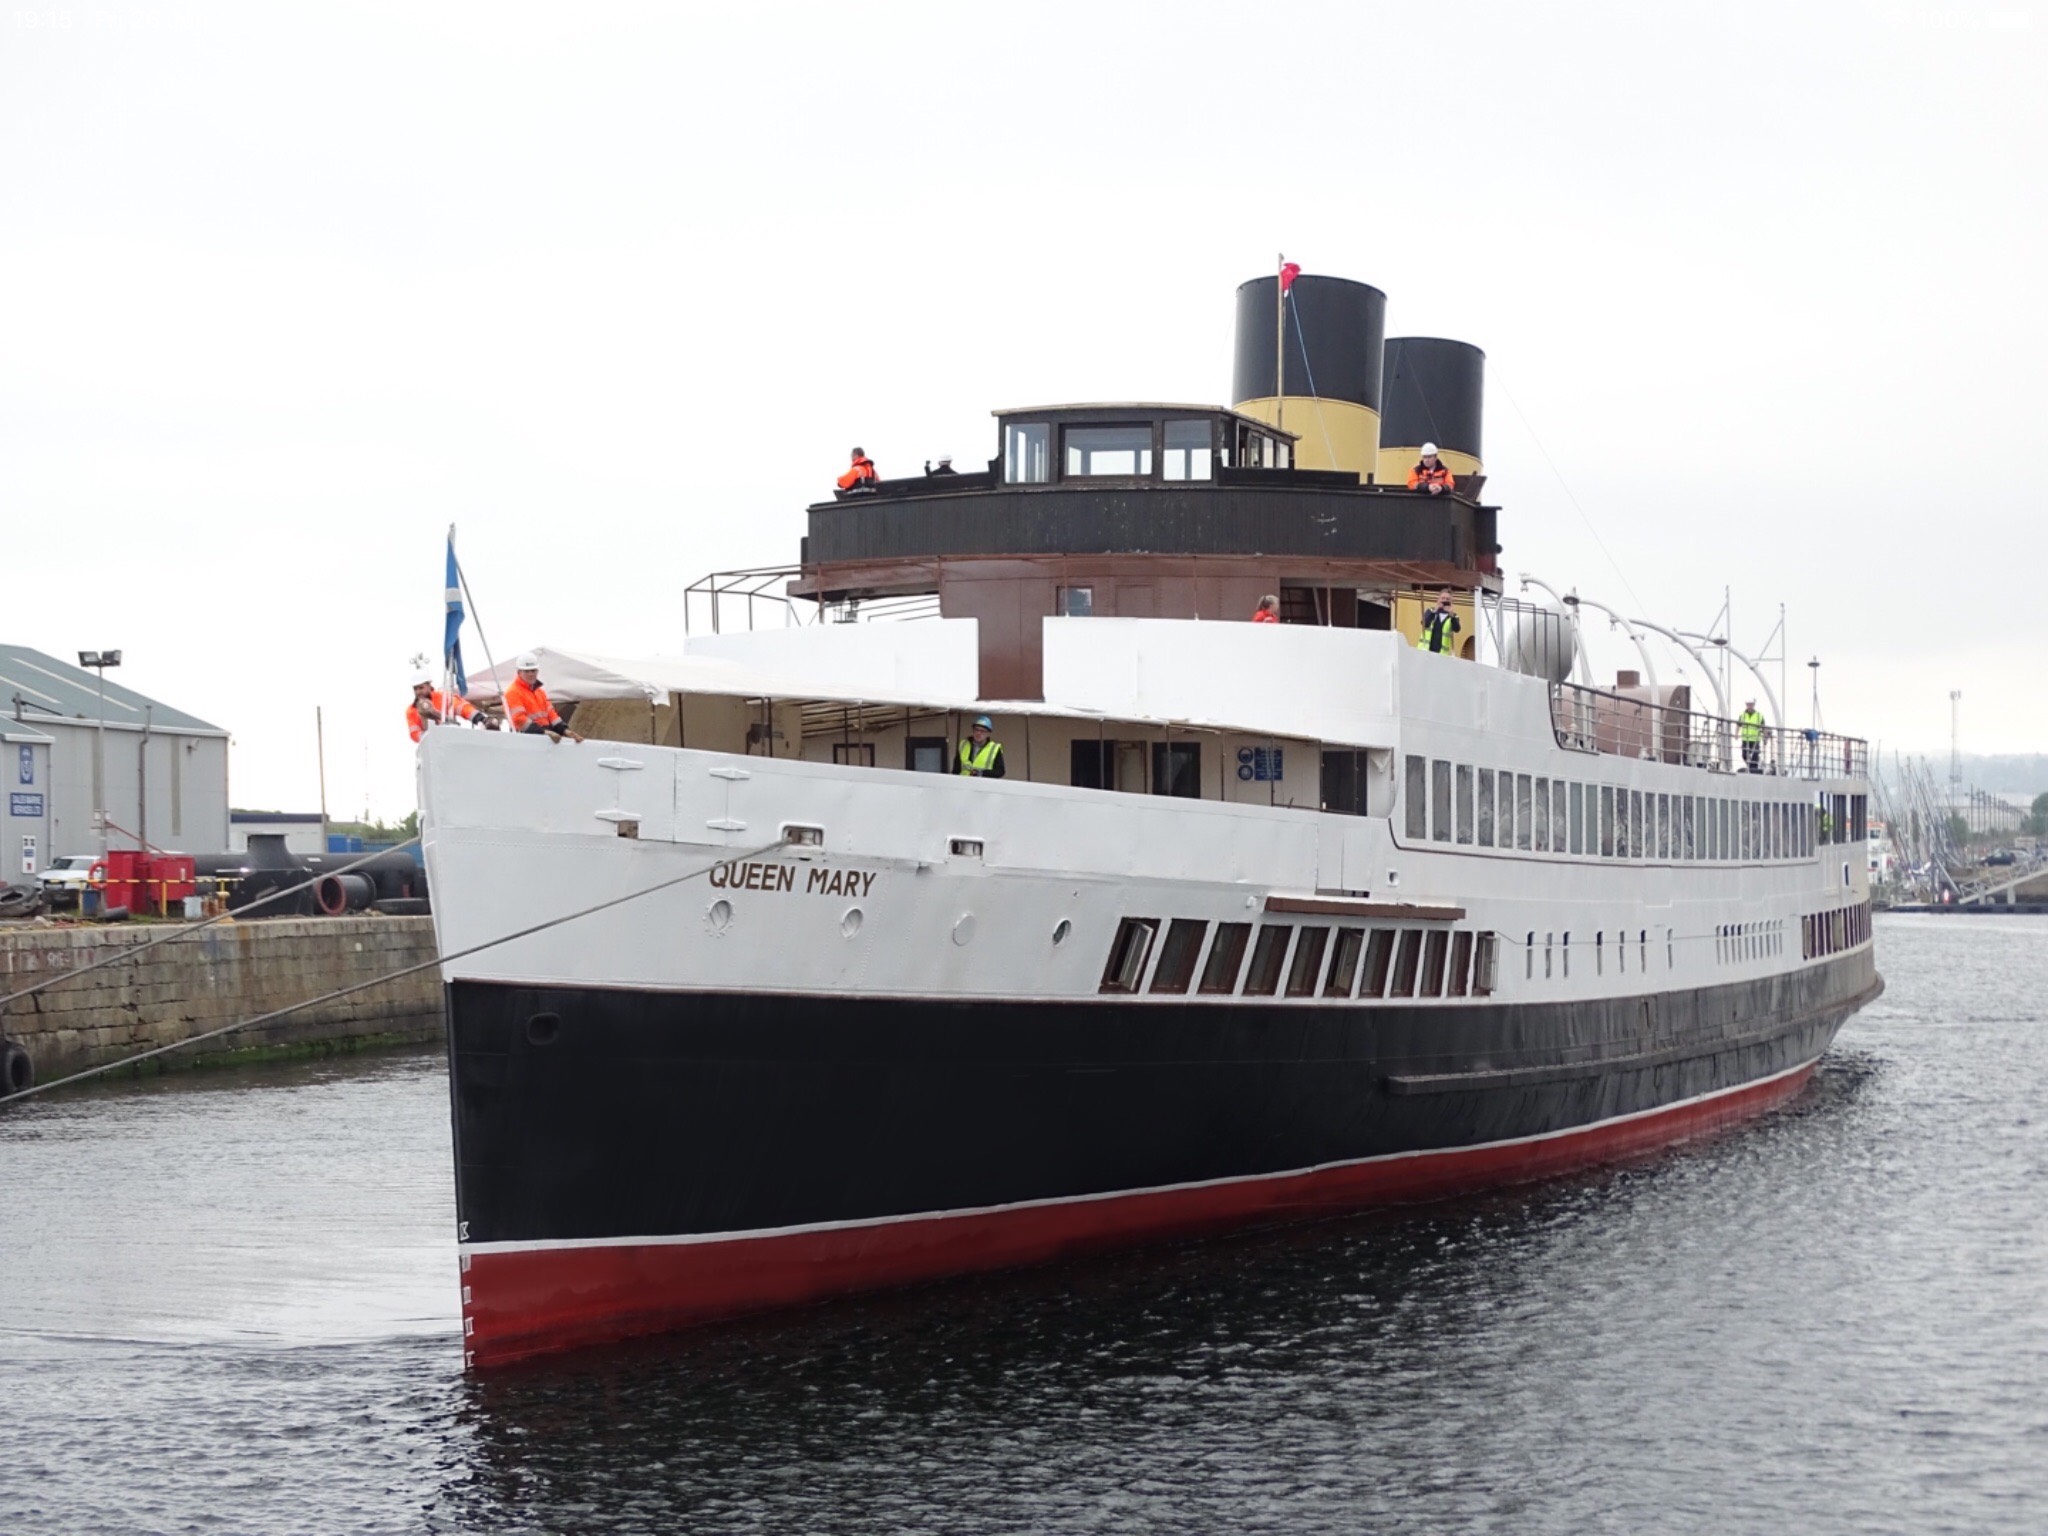 Queen Mary boost welcomed by Govan housing associations